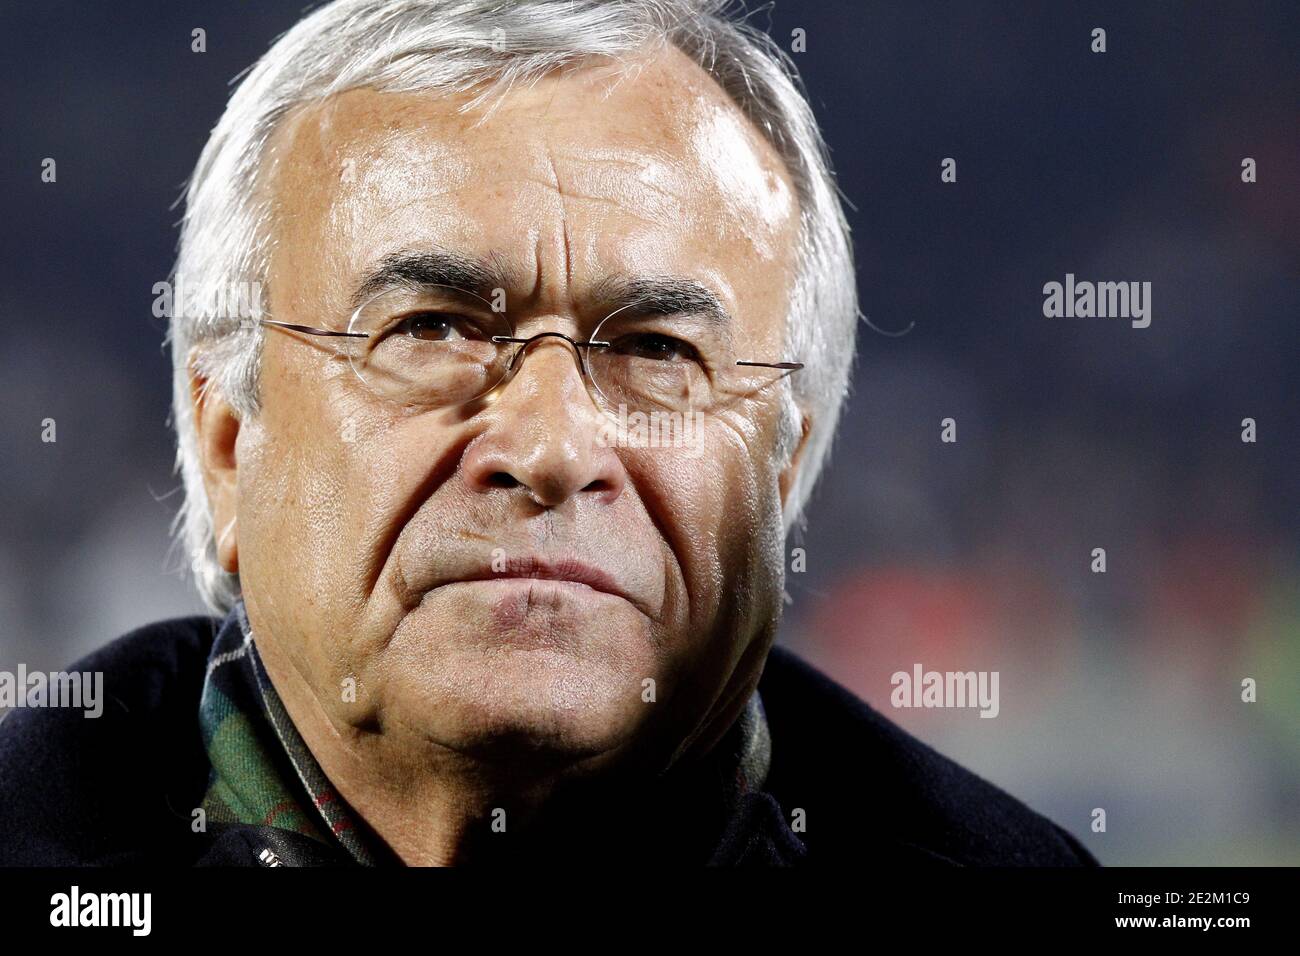 Olympique de Marseille's President Jean-Claude Dassier during the French  First League Soccer match, Girondins de Bordeaux vs Olympique de Marseille  at Chaban-Delmas Stadium in Bordeaux, France on January 17, 2010. The match